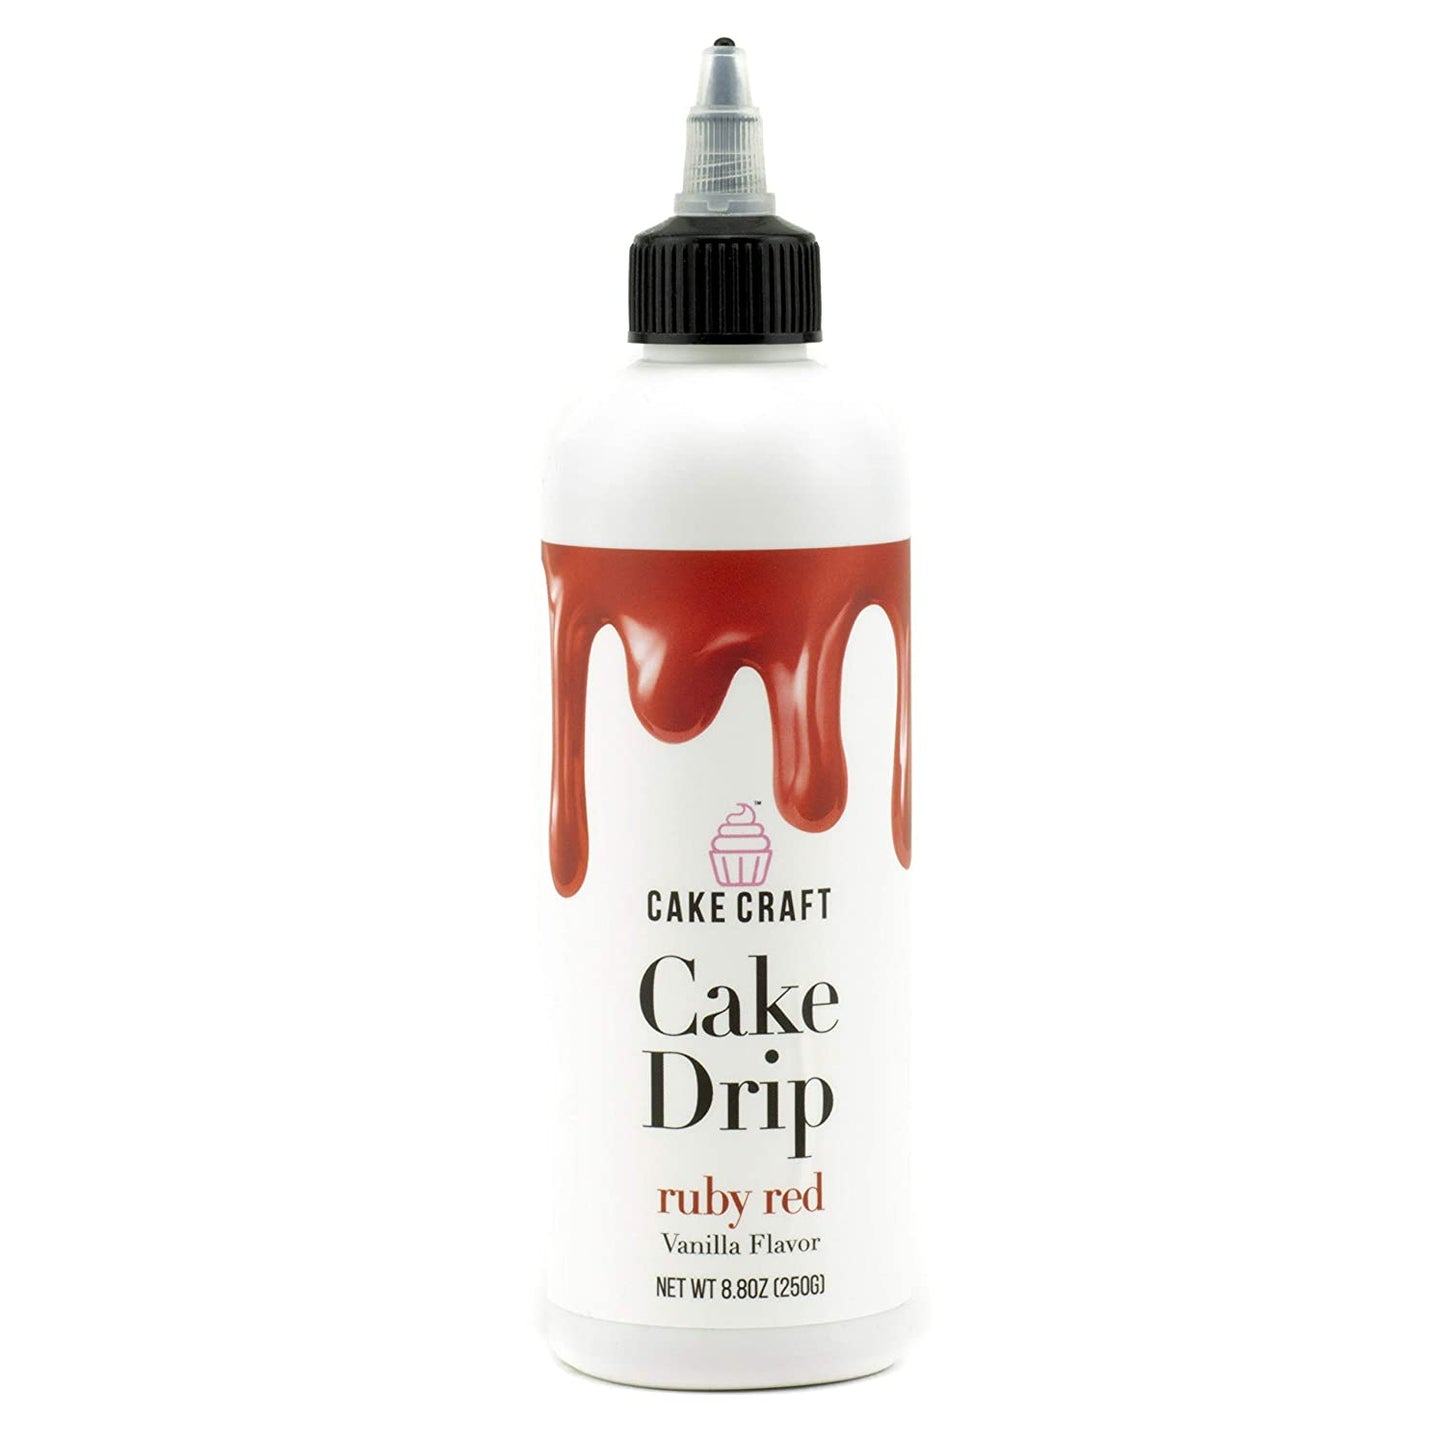 Cake Craft Ruby Red Cake Drip (Vanilla Flavor) 8.8 Ounces